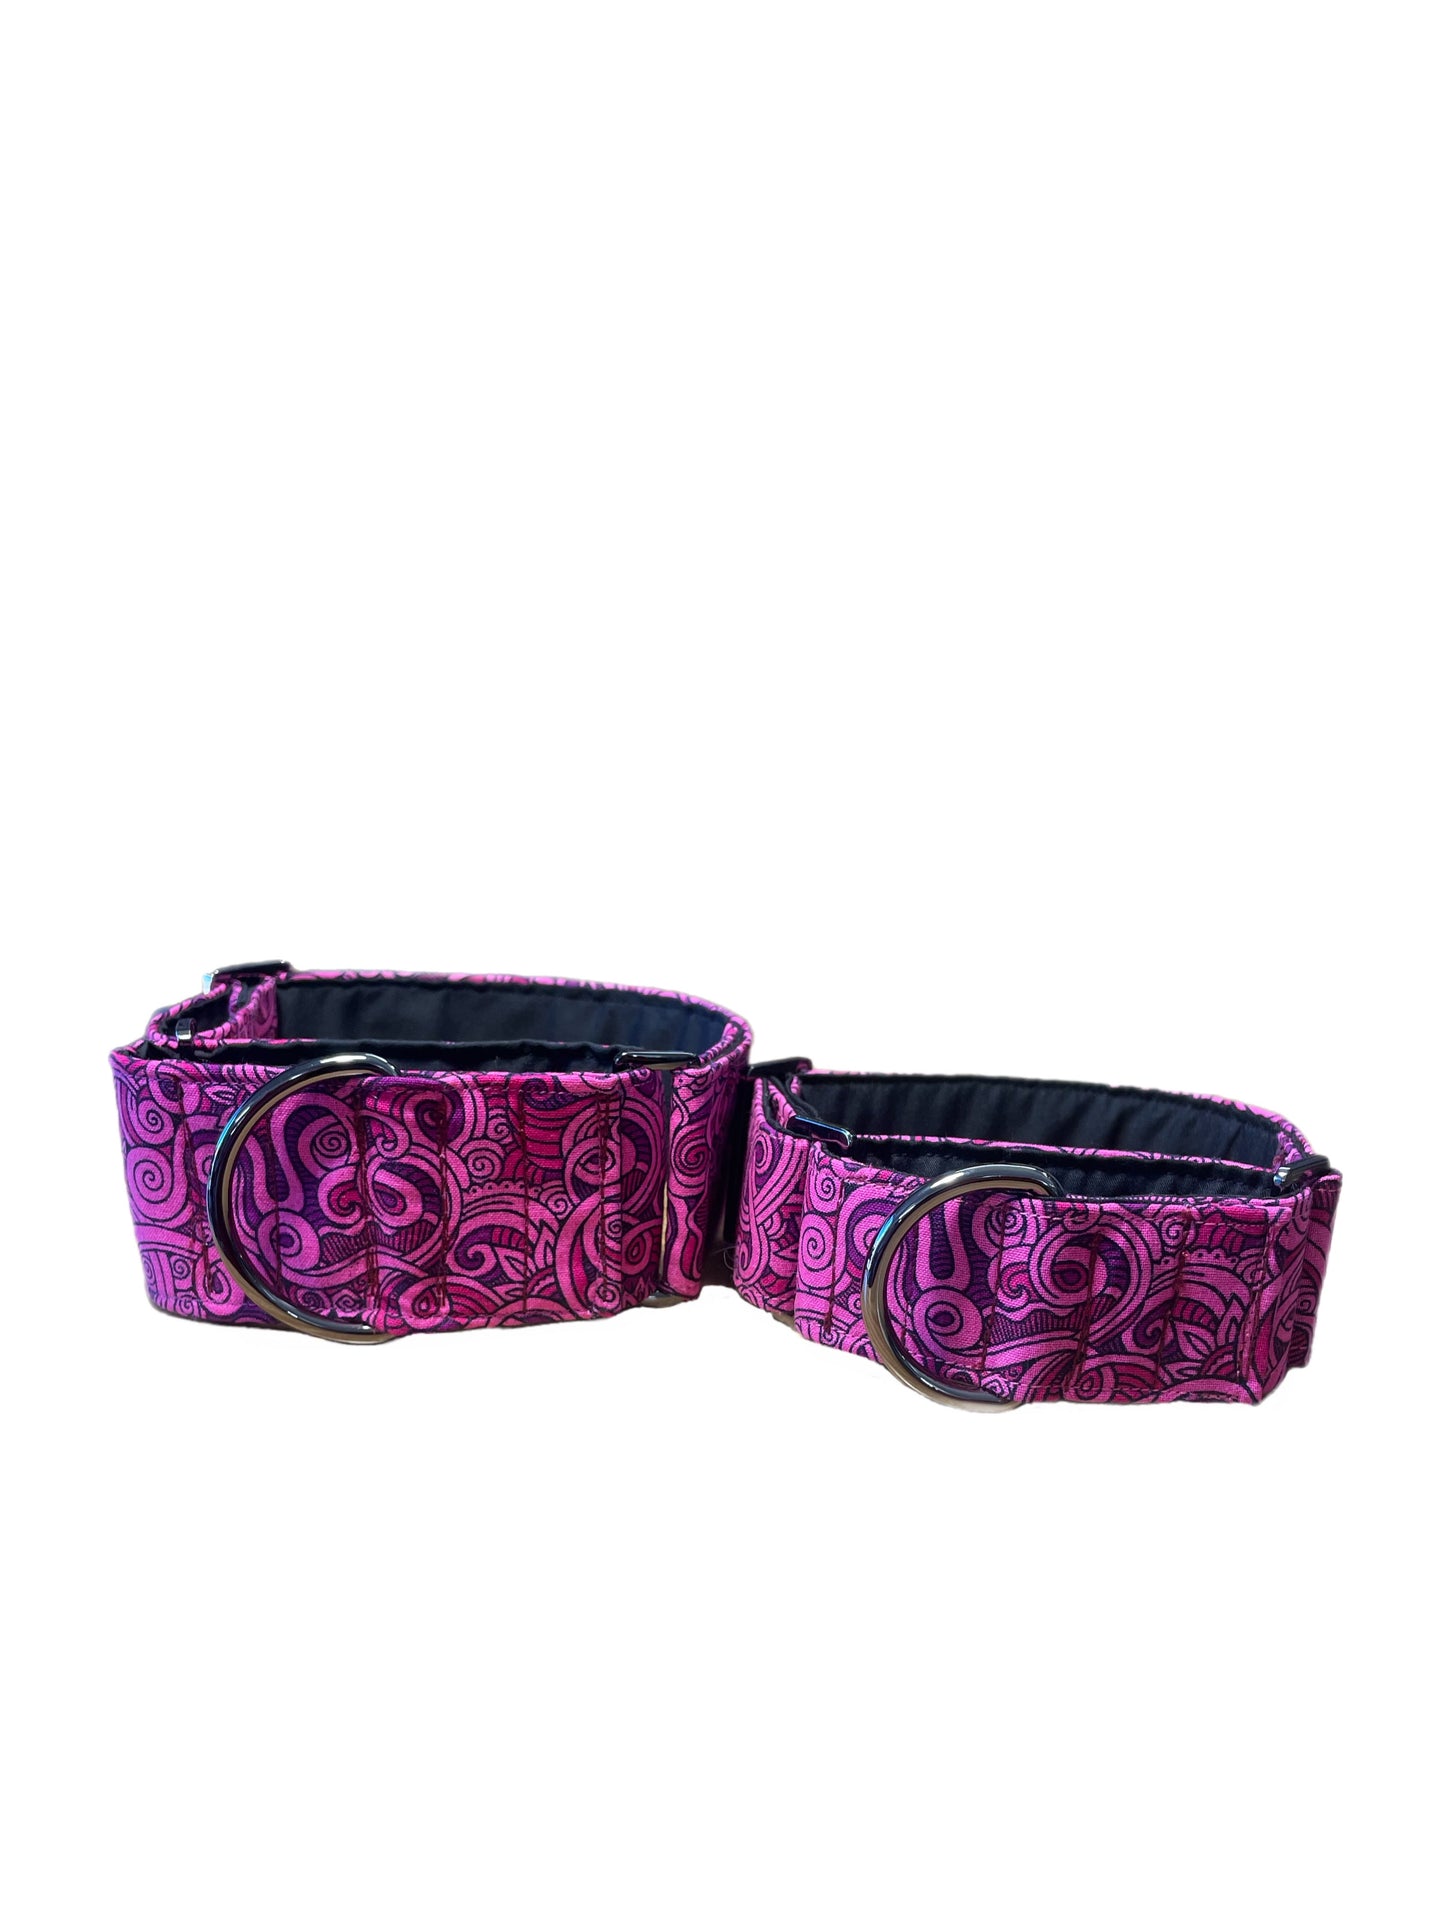 Paisley design greyhound whippet wide Martingale collar cotton covered super soft